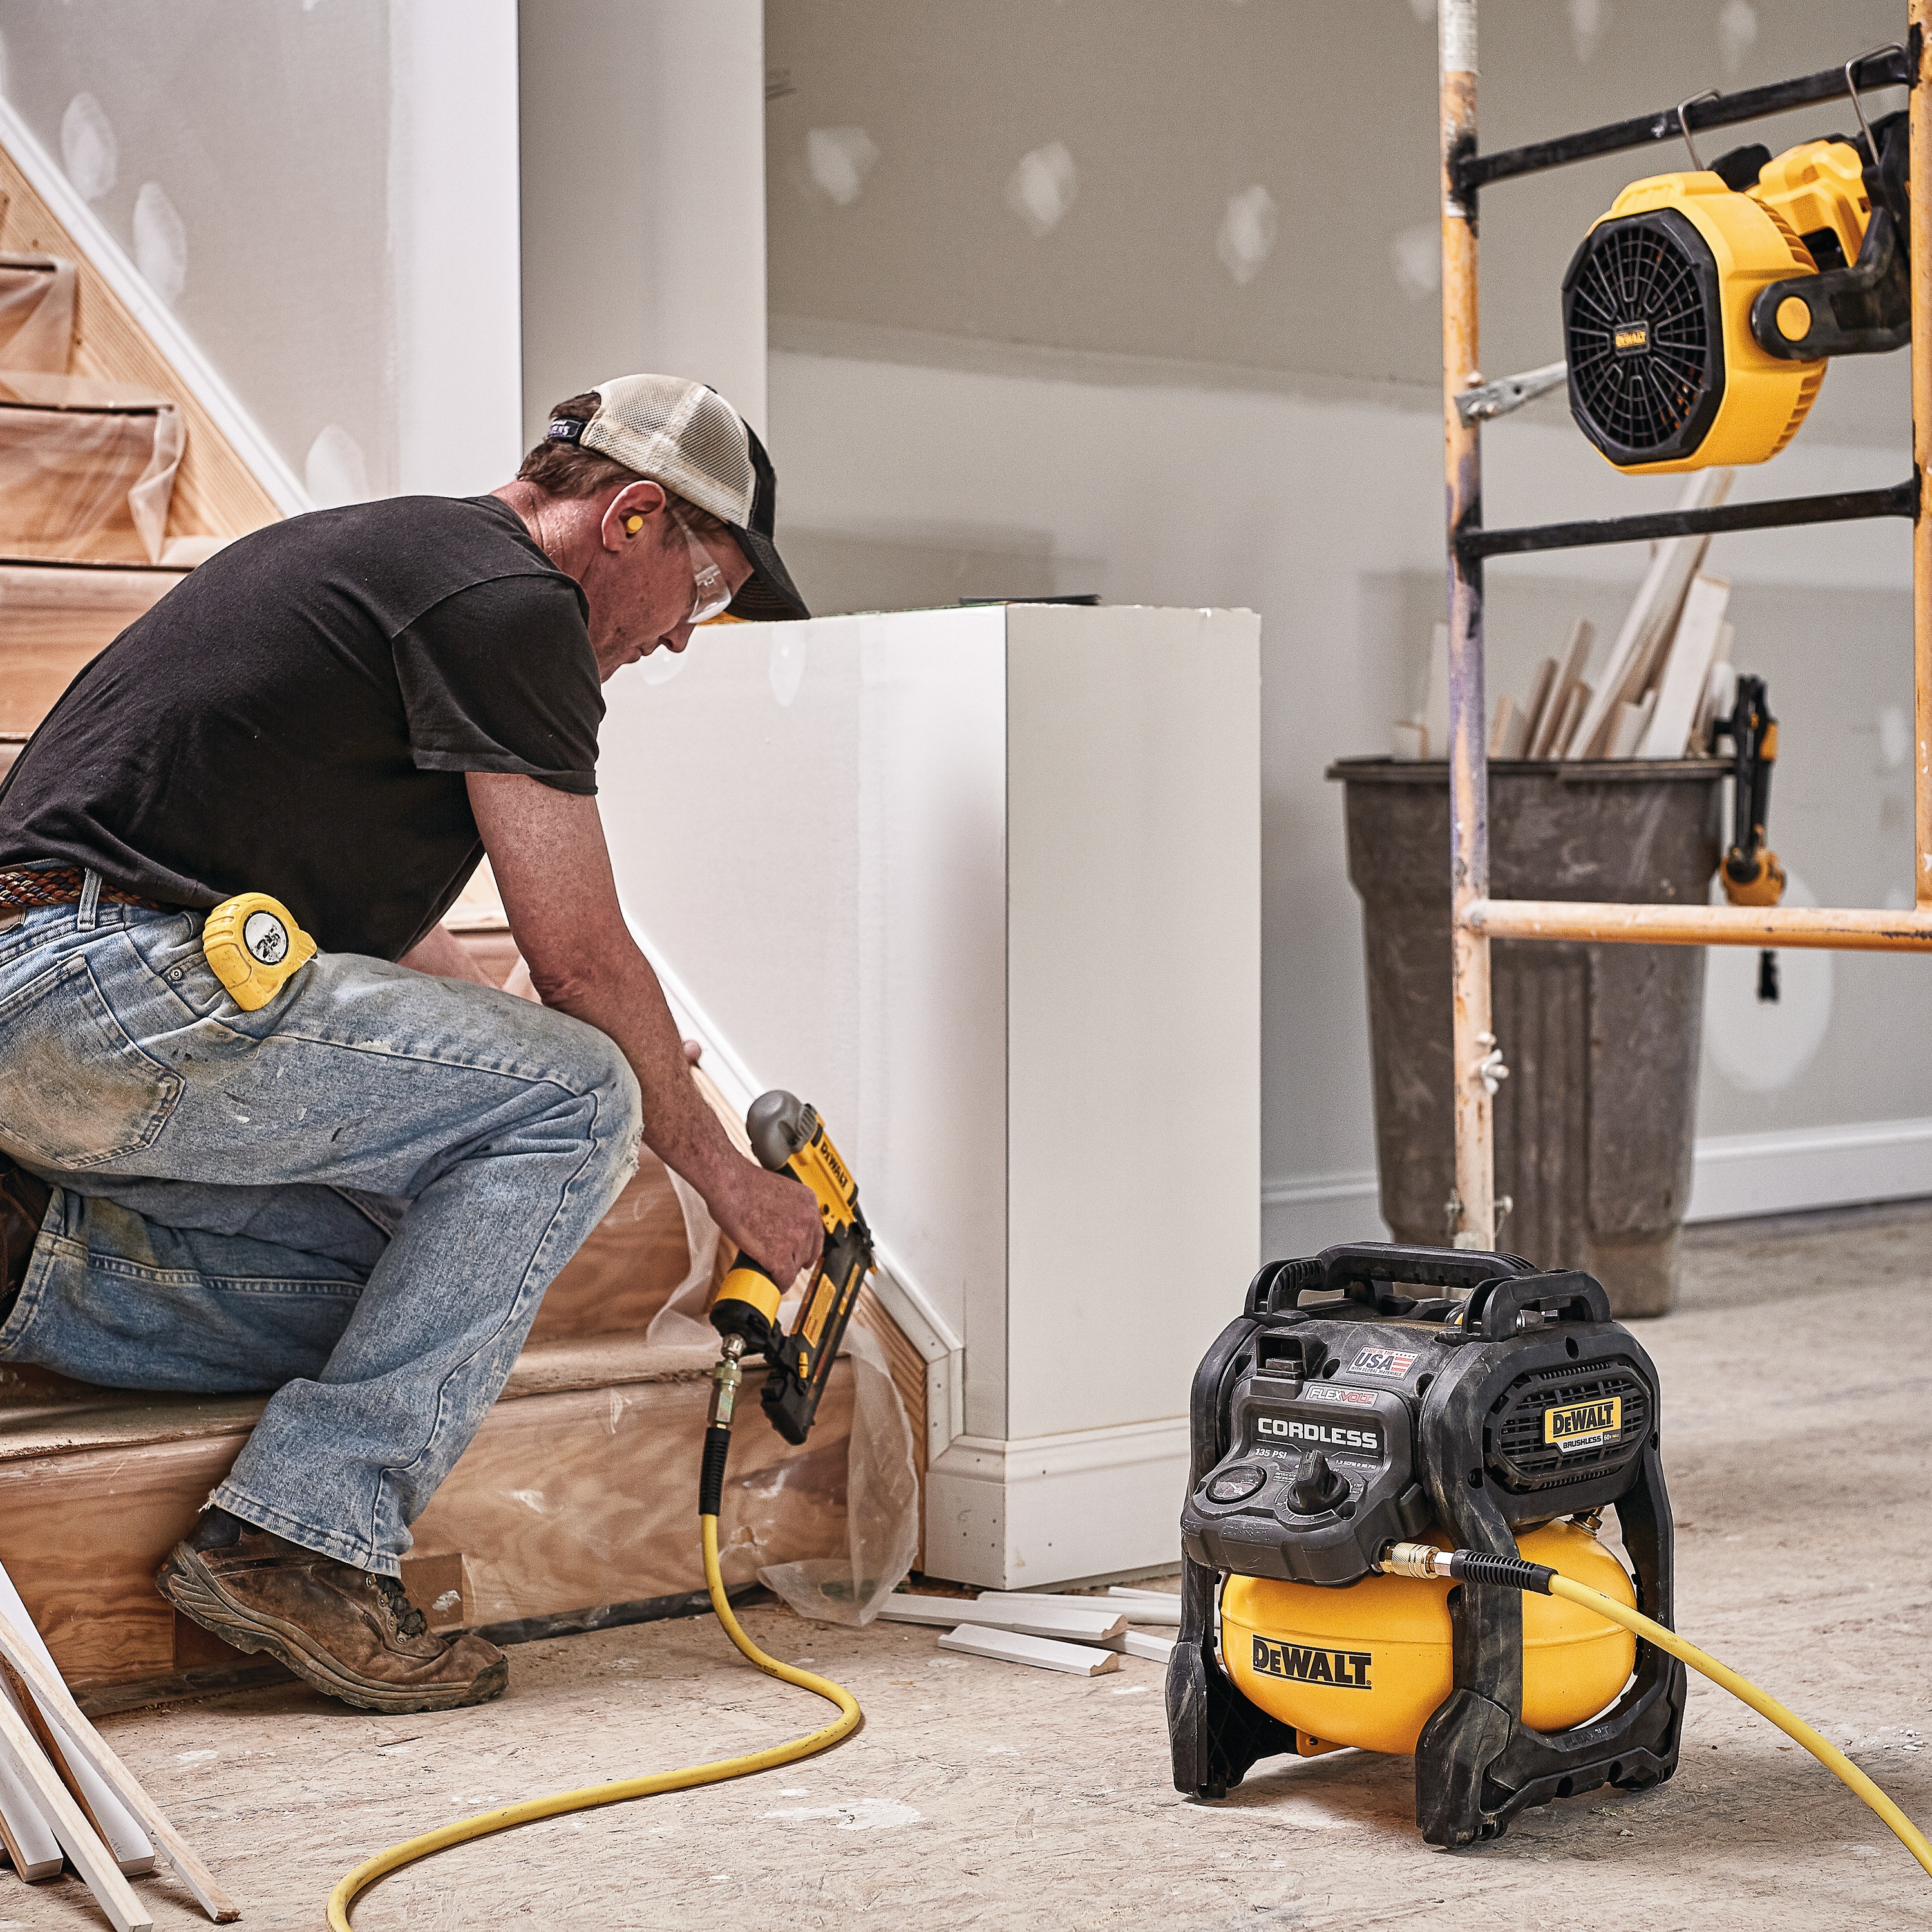 FLEXVOLT® 2.5 GALLON CORDLESS AIR COMPRESSOR being used by a person to power a pneumatic nailer for countersinking holes in a wood scotting